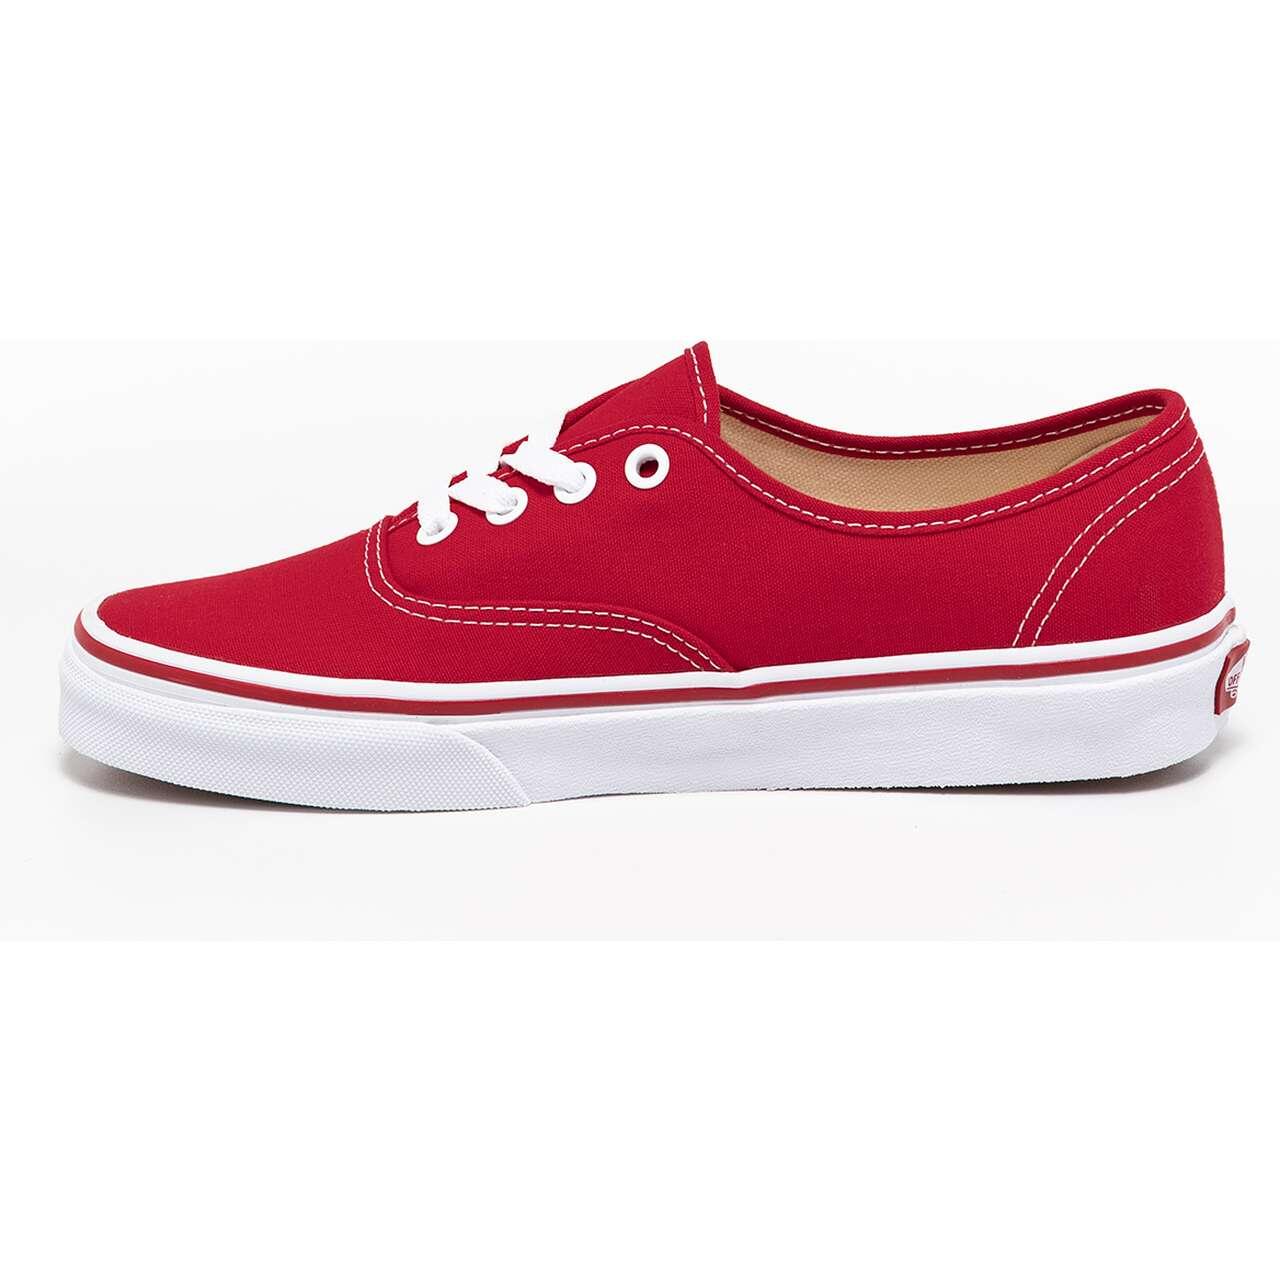 Authentic Red Shoe EE3RED 5/6